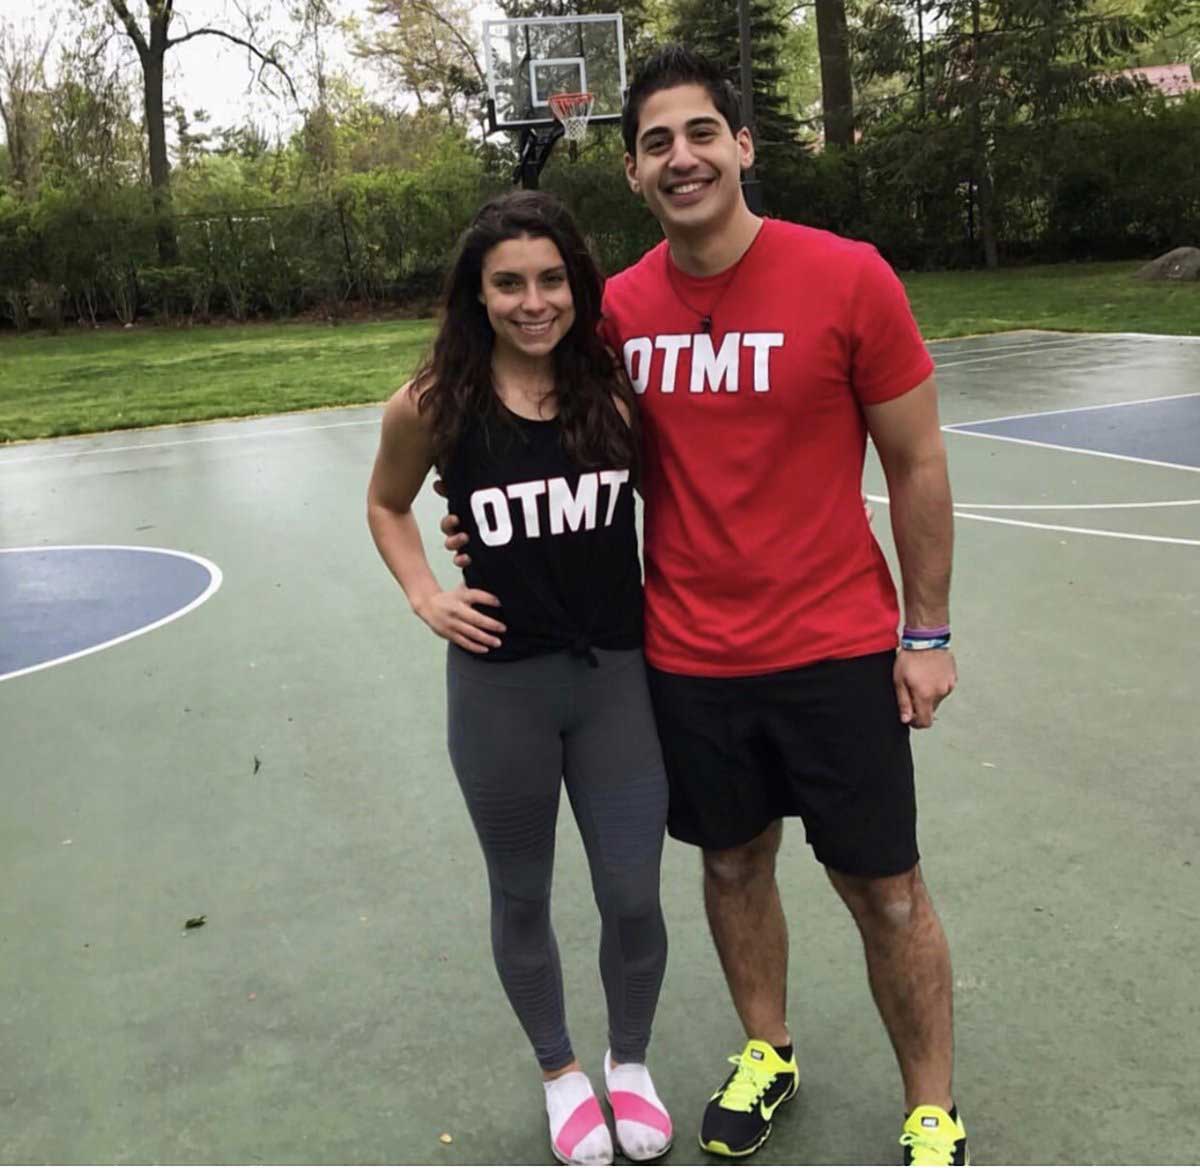 Whitestone native’s mobile gym brings daily workouts directly to the people